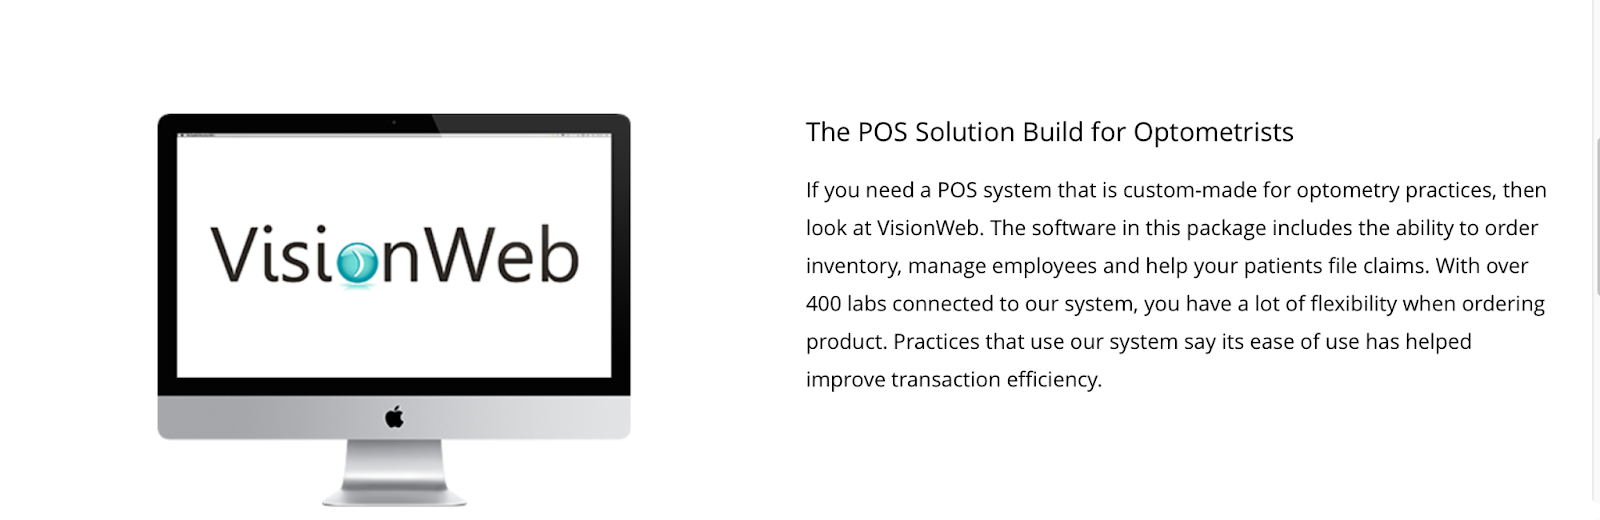 POS Pros Vision Web POS solution for optometrists